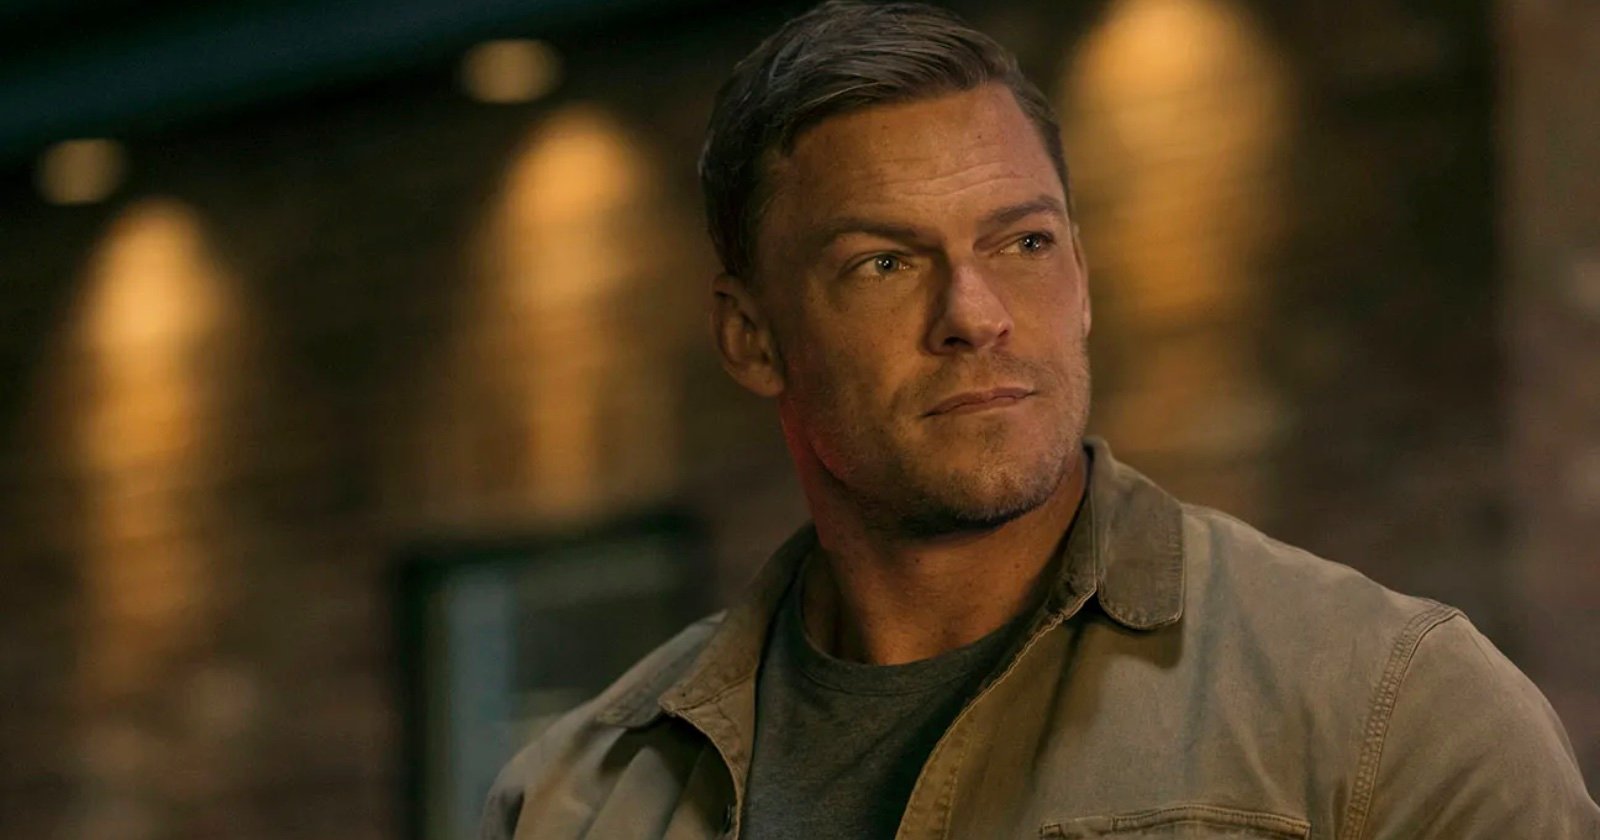  reacher star alan ritchson was sexually assaulted very 